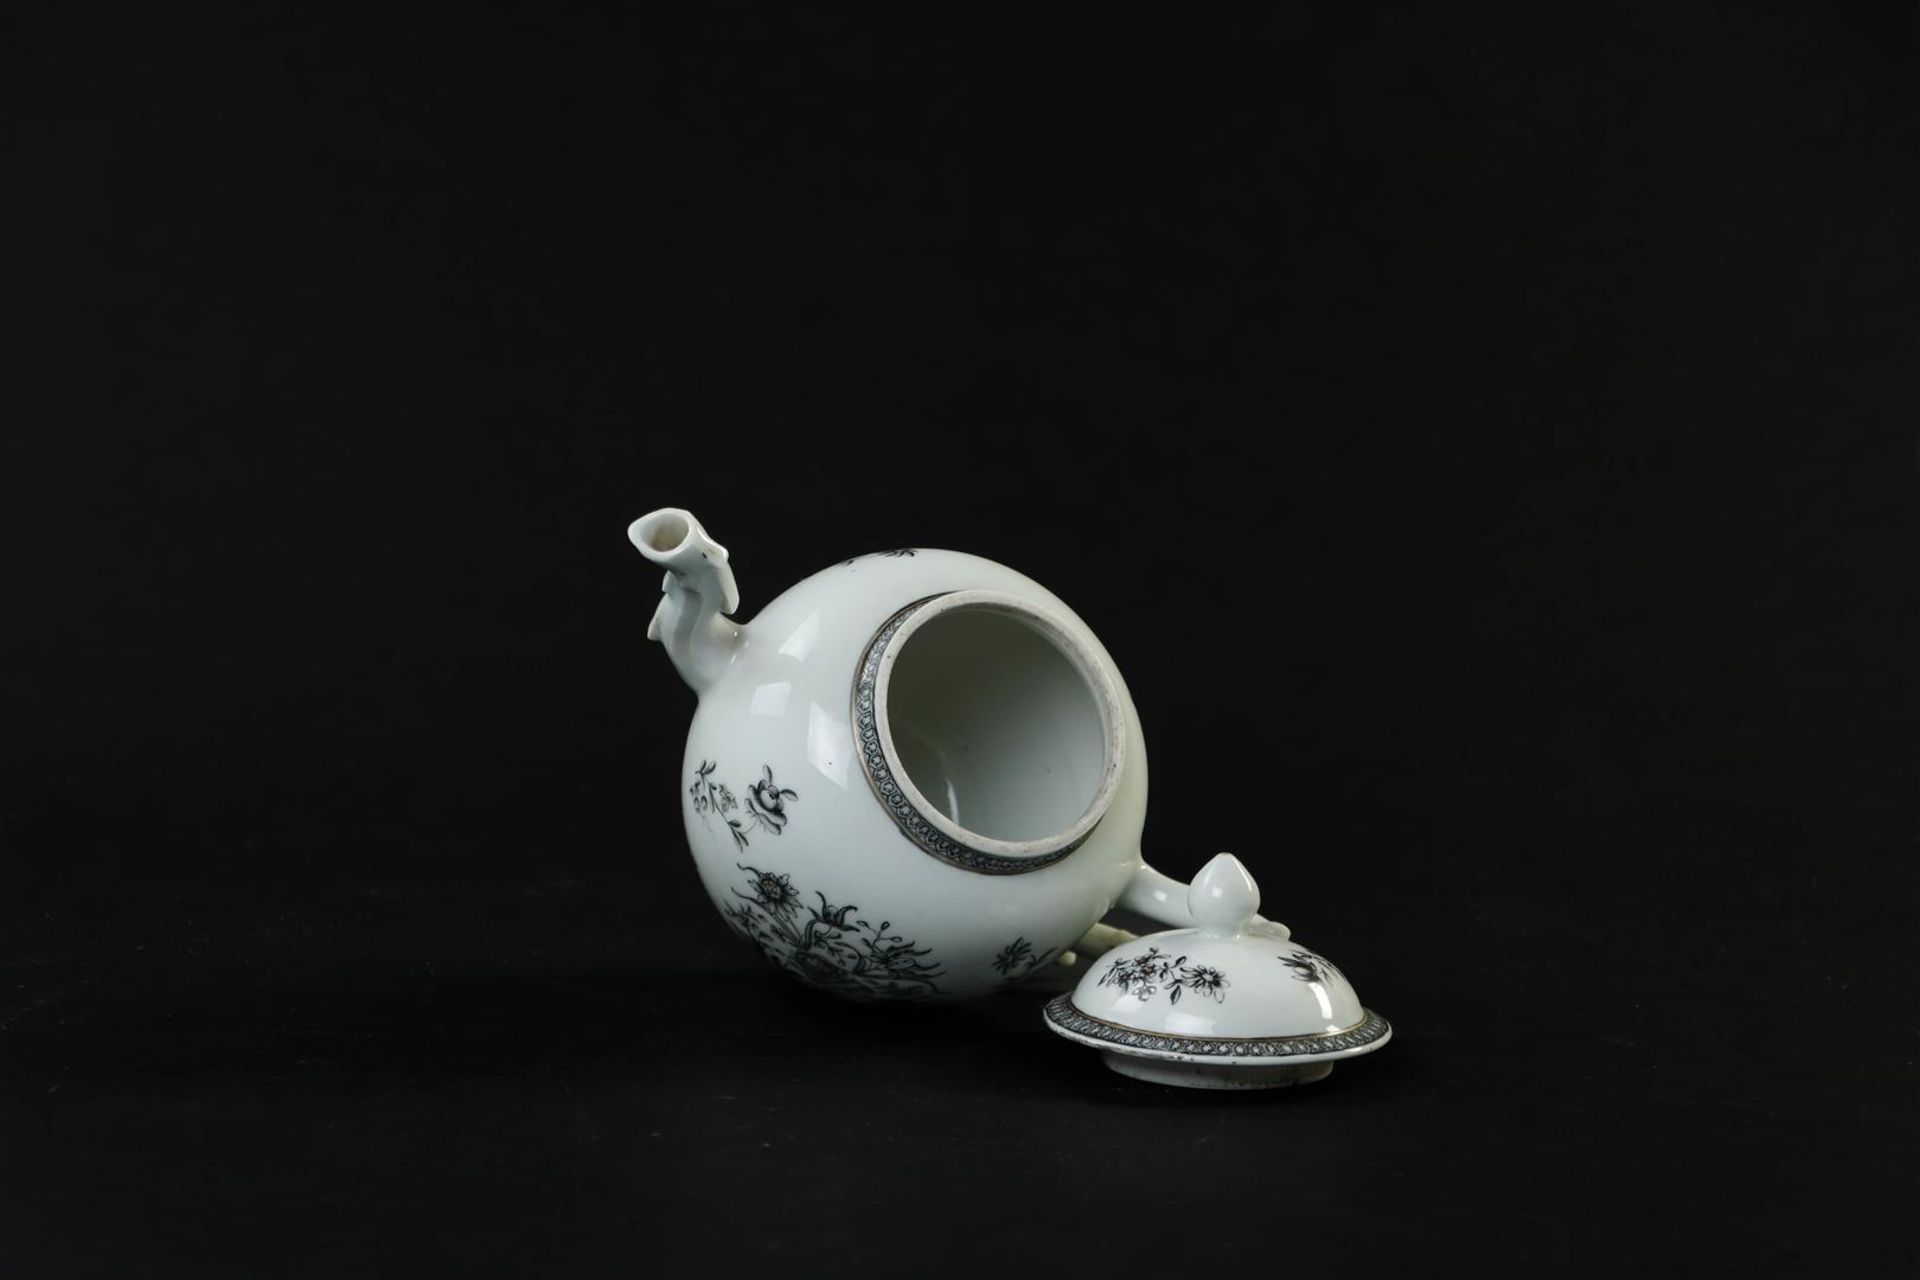 An Encre de Chine tableware set consisting of a teapot, milk jug, tea caddy, patty pan and spoon tra - Image 7 of 24